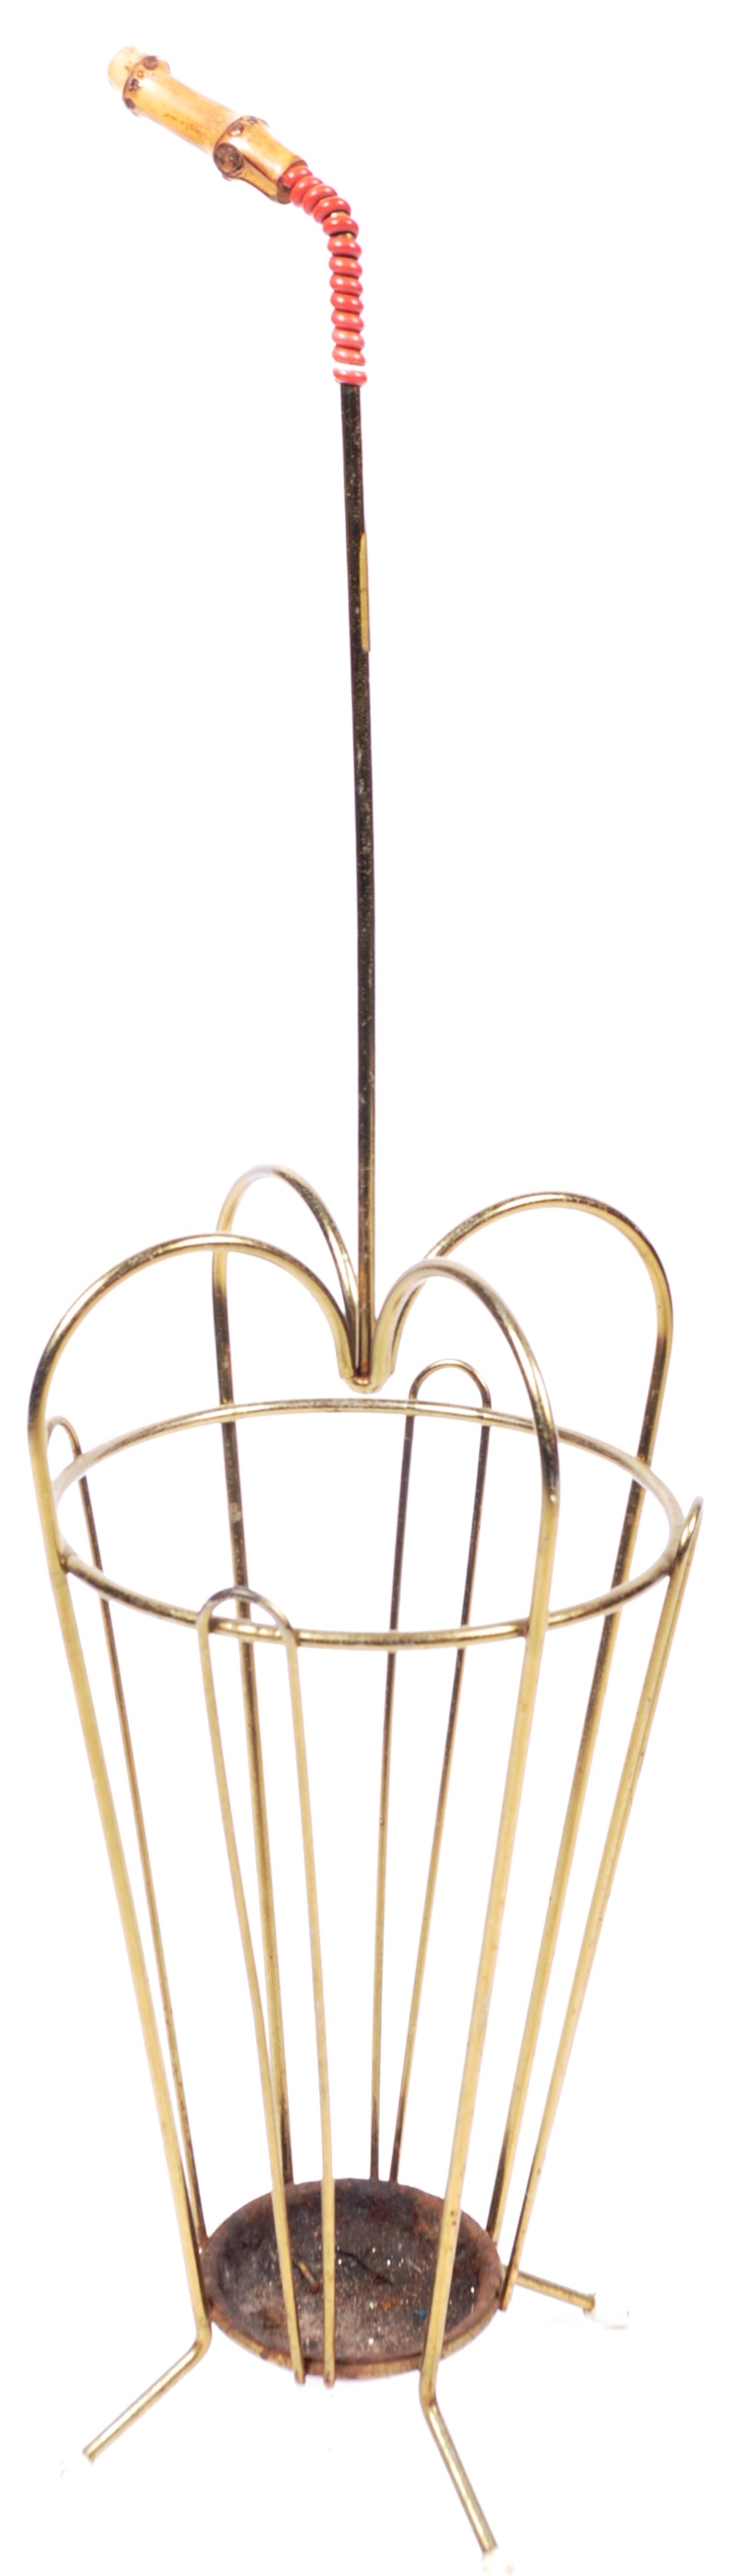 RETRO 20TH CENTURY BRASS WORKED STICKSTAND IN THE FORM OF AN UMBRELLA